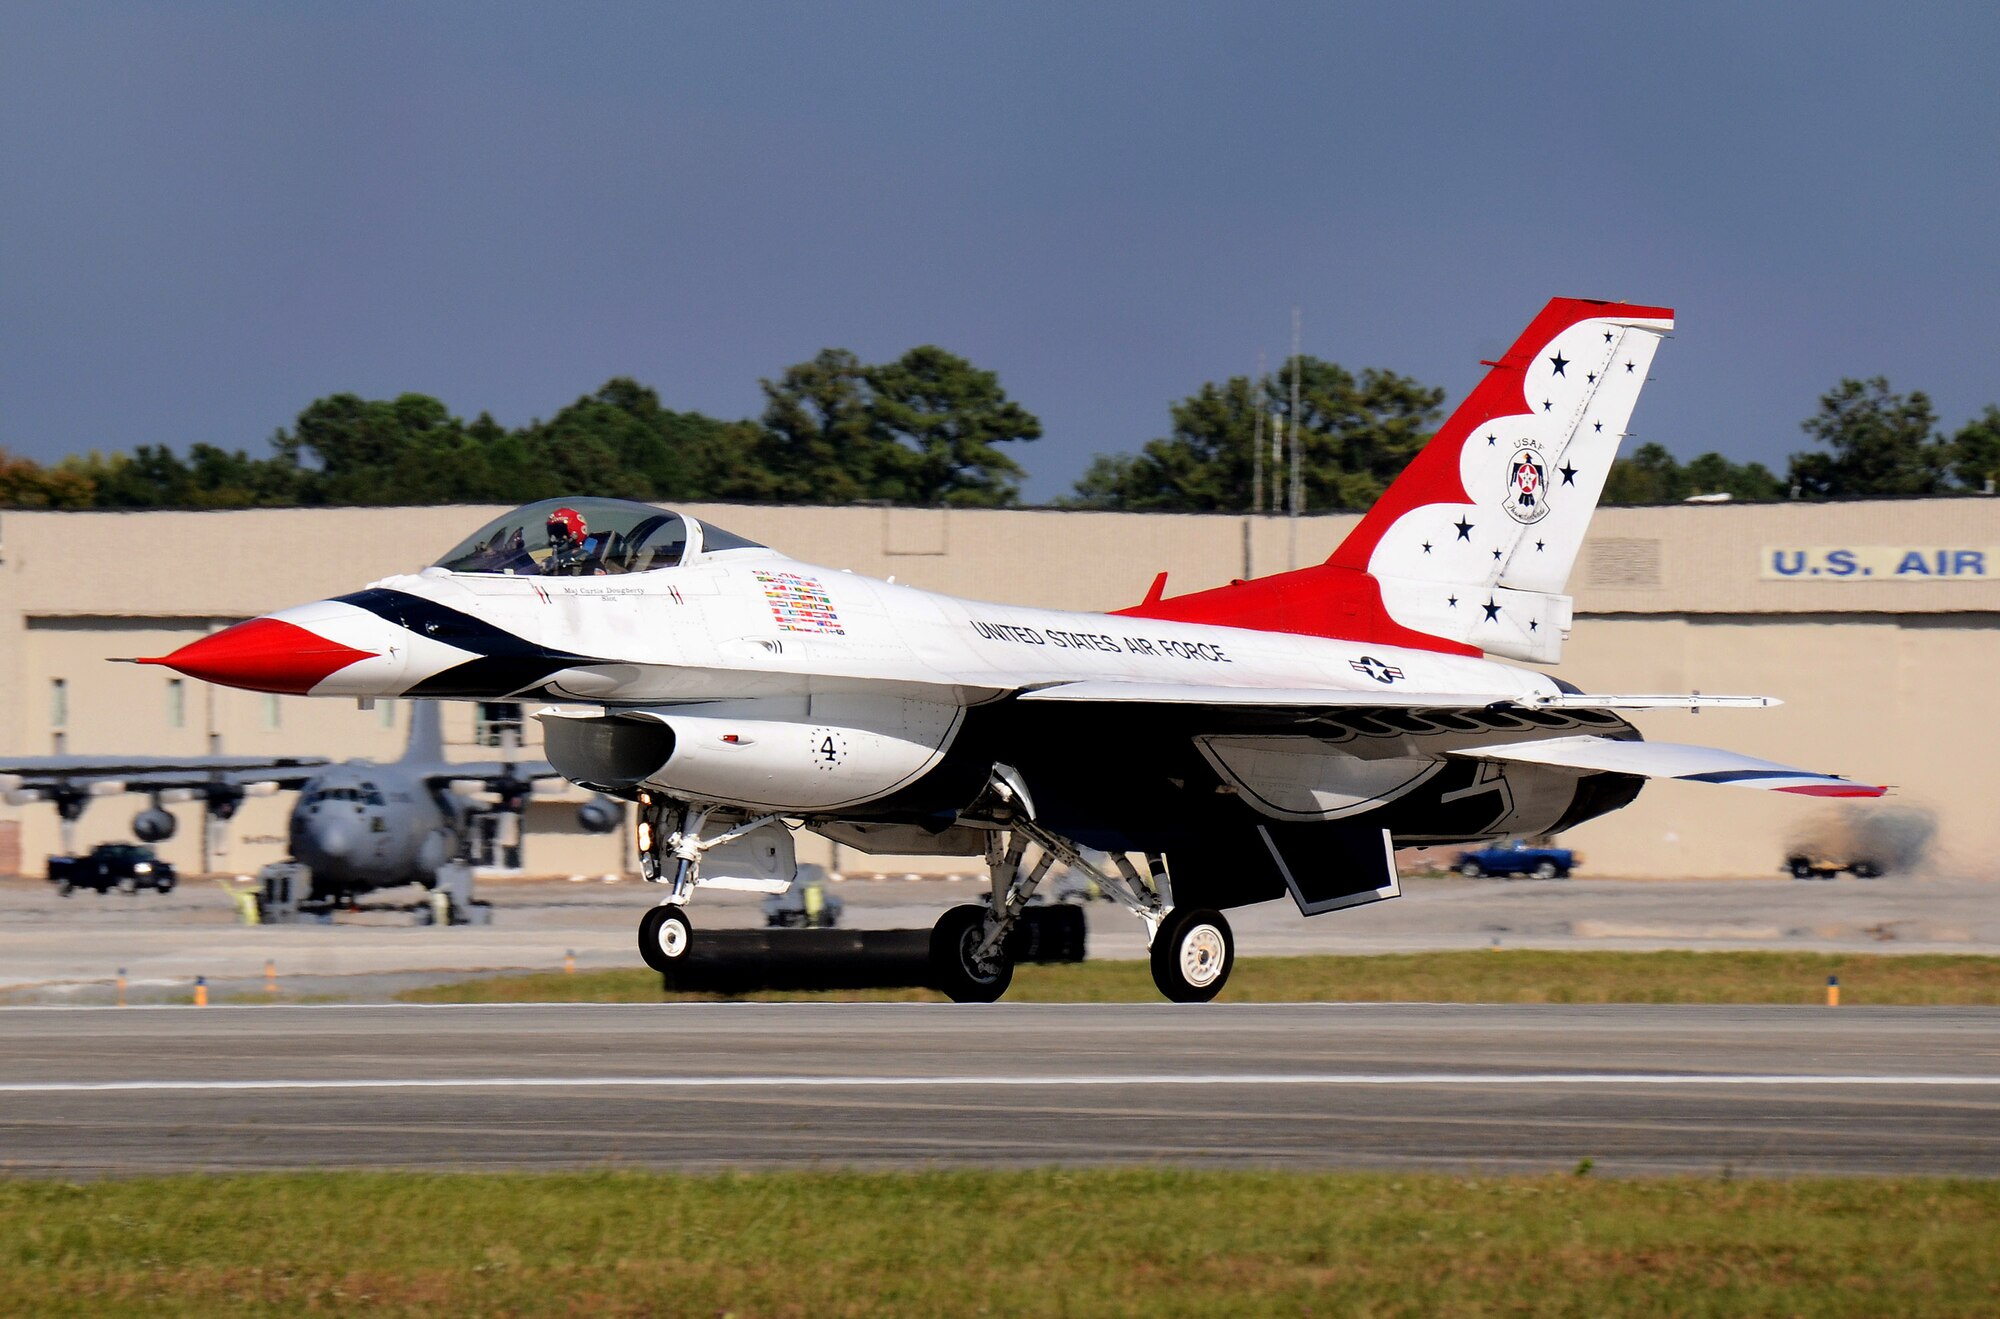 Thunderbird #4, Maj. Curtis Dougherty, flying the slot in the diamond formation, departs Dobbins Air Reserve Base for the Wings Over North Georgia air show Oct. 18, 2014. The USAF Air Demonstration Squadron Thunderbirds are using Dobbins as their base of operations for their performances at the air show this weekend at the Russell Regional Airport in Rome, Georgia. (U.S. Air Force photo/ Brad Fallin/Released)